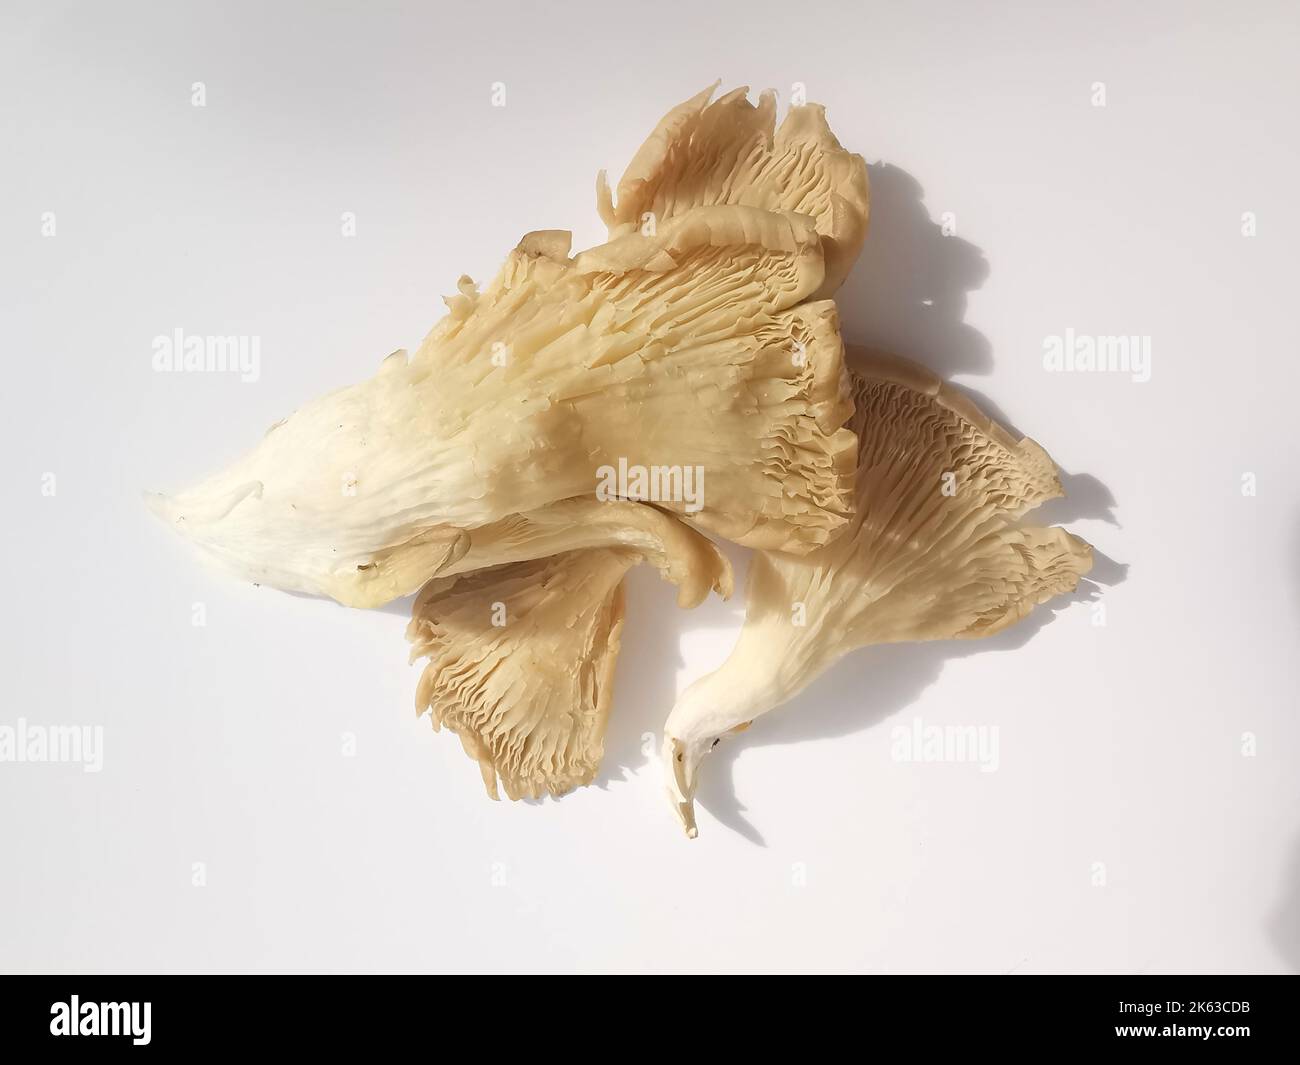 Group of oyster mushrooms against plain white background with copy space Stock Photo